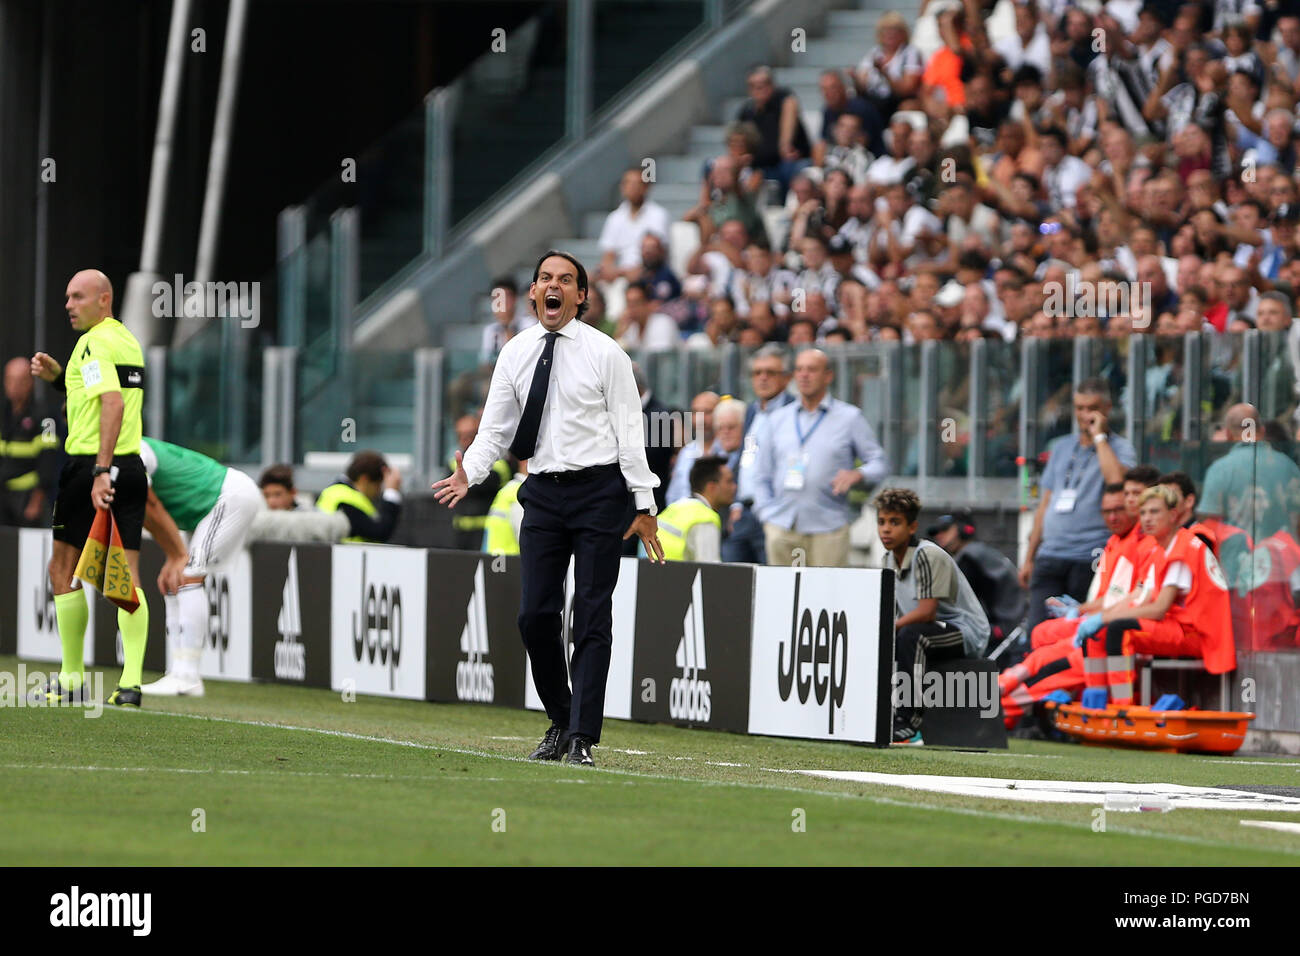 Torino, Italy. 25th August, 2018. Simone Inzaghi, head coach of SS Lazio, gestures during the Serie A football match between Juventus Fc and SS Lazio.  Credit: Marco Canoniero / Alamy Live News . Credit: Marco Canoniero/Alamy Live News Stock Photo